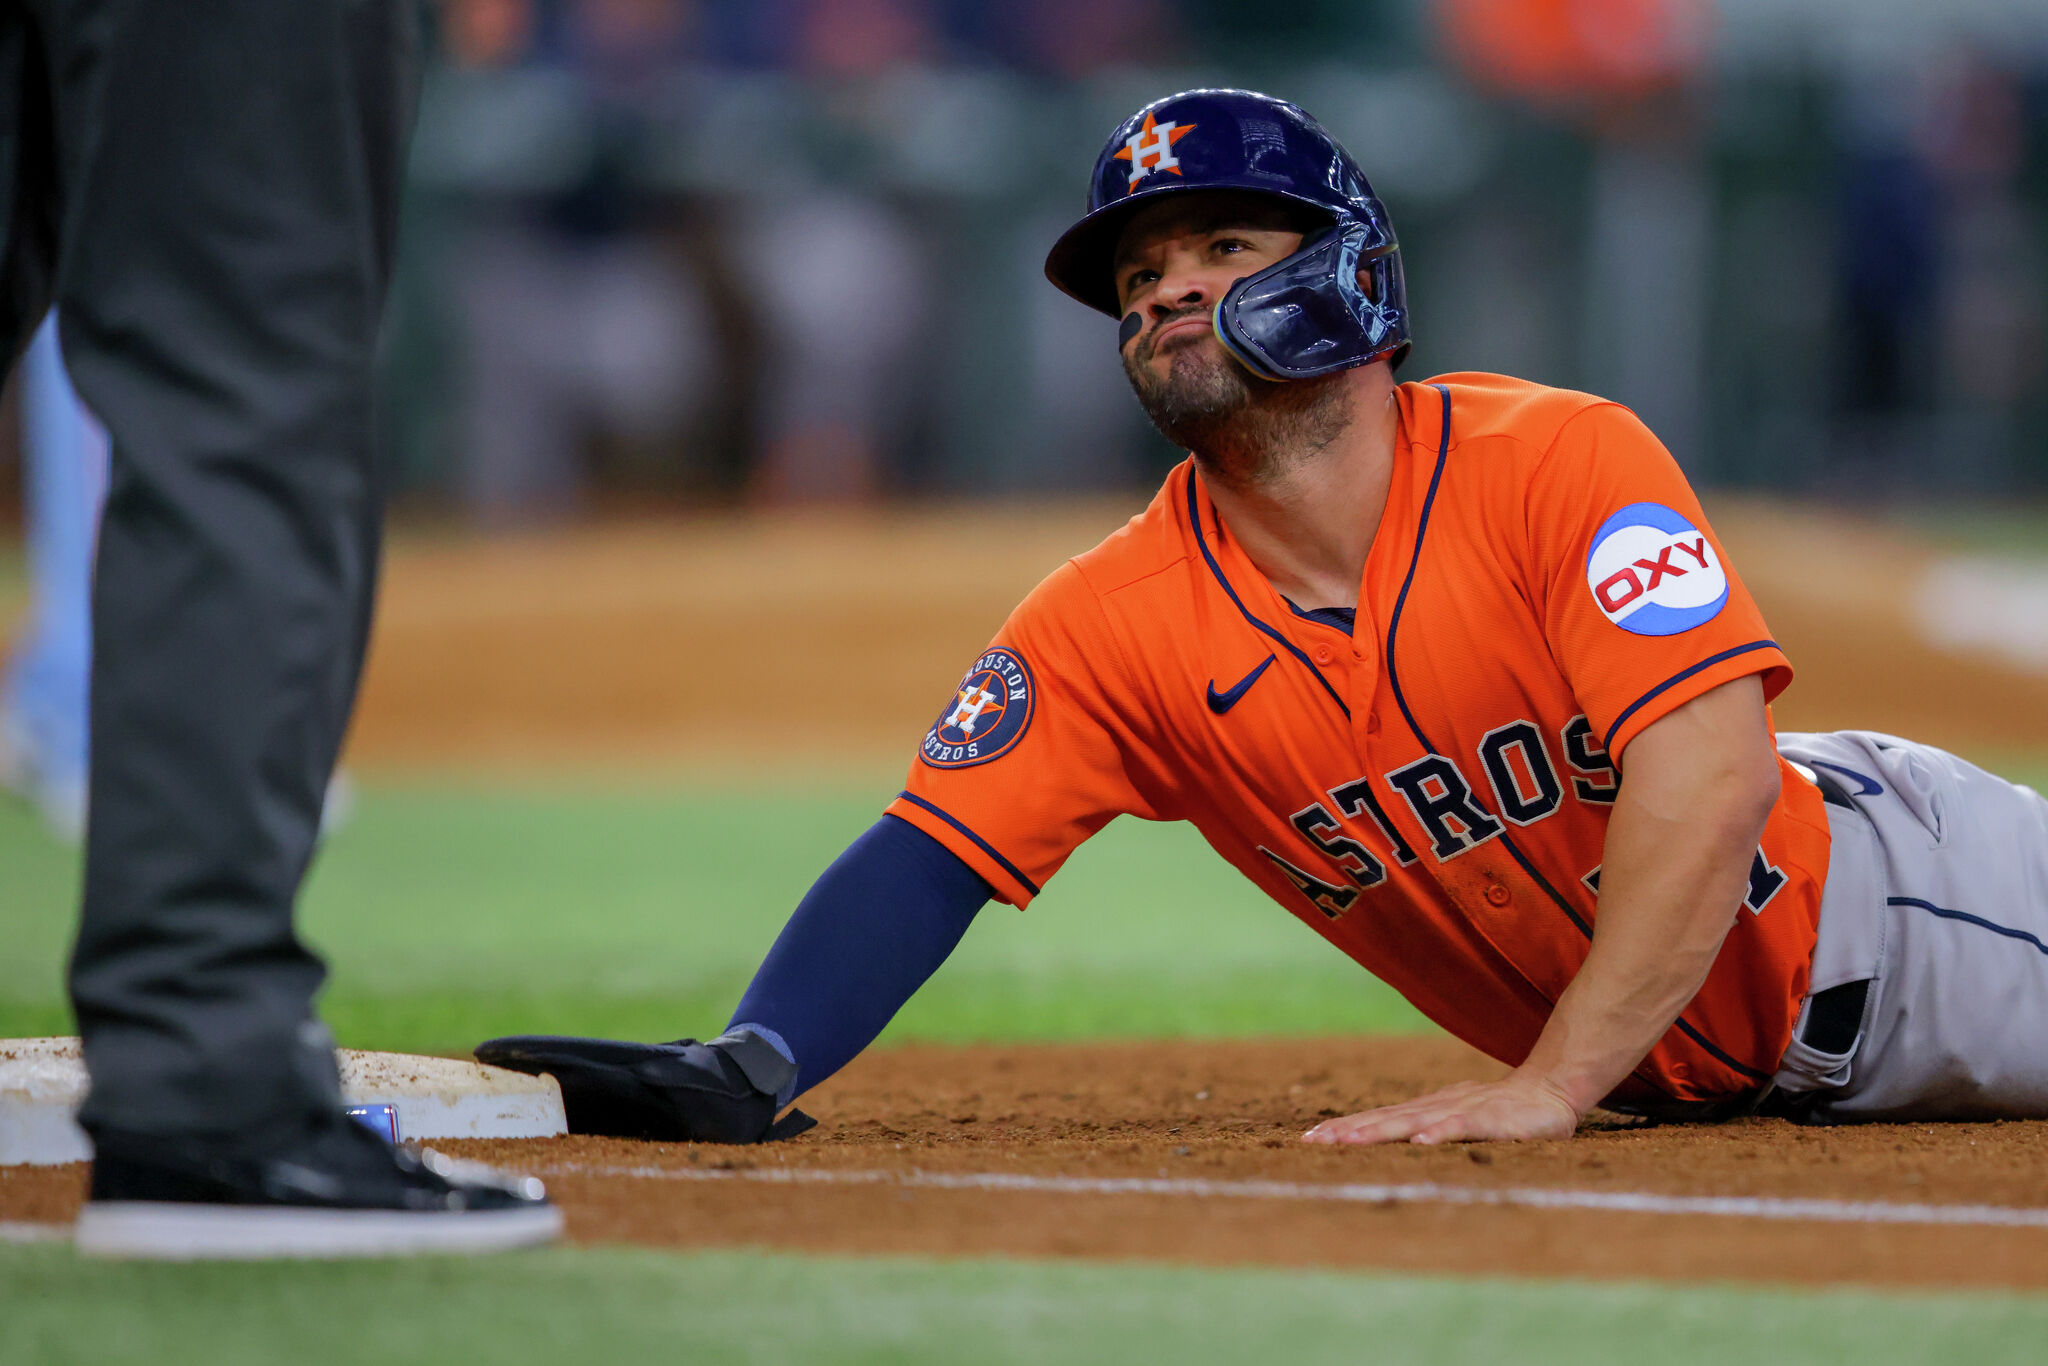 Injury update: Ailing Astros shut down Jose Altuve for now